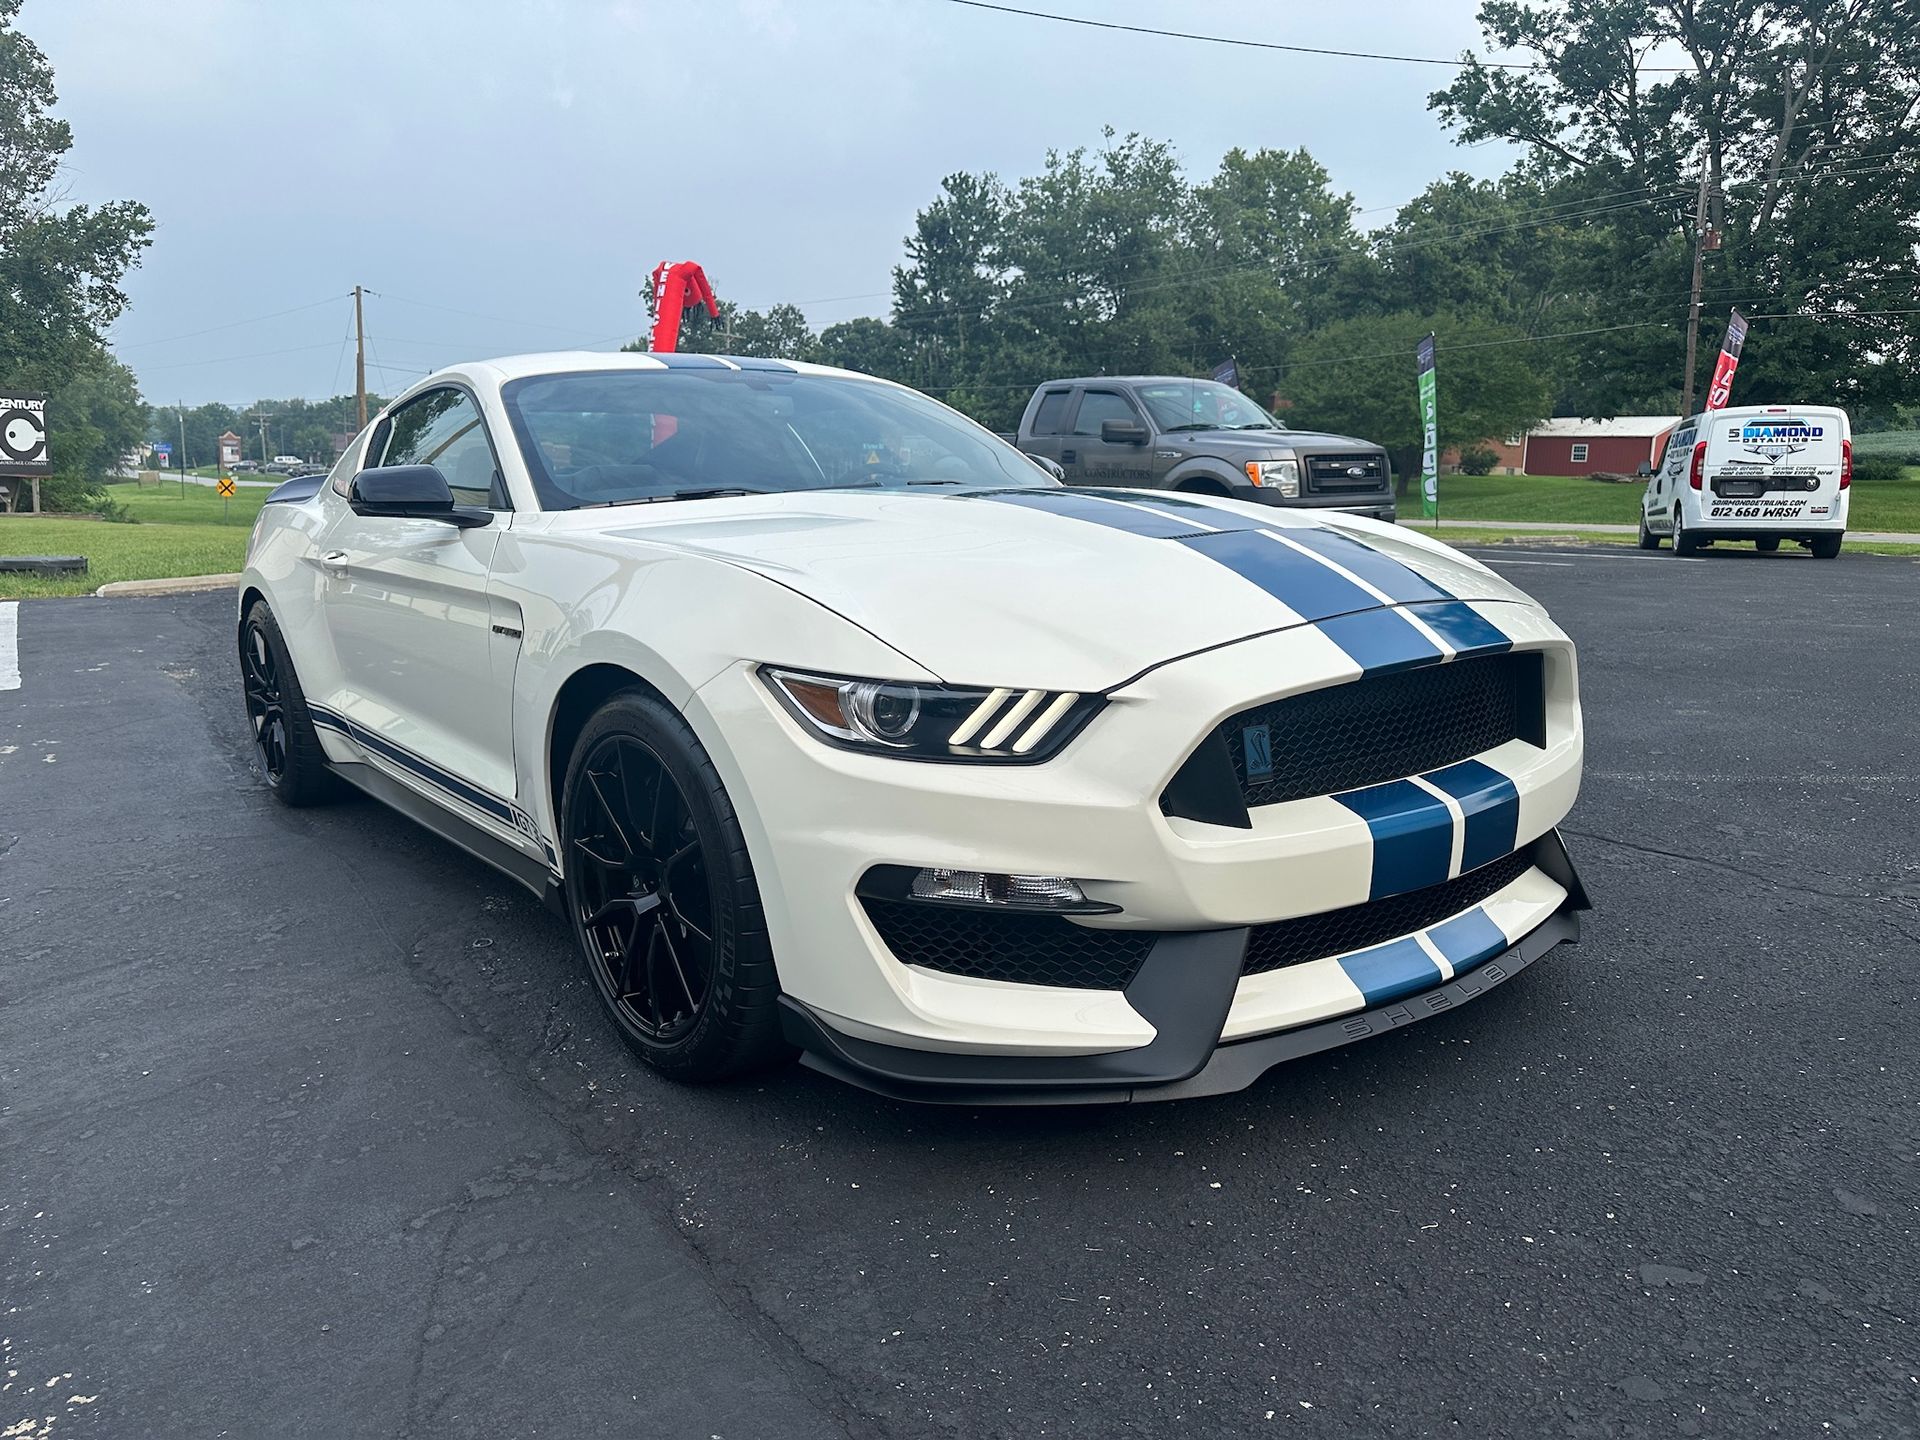 a white and blue ford mustang is parked in a parking lot .